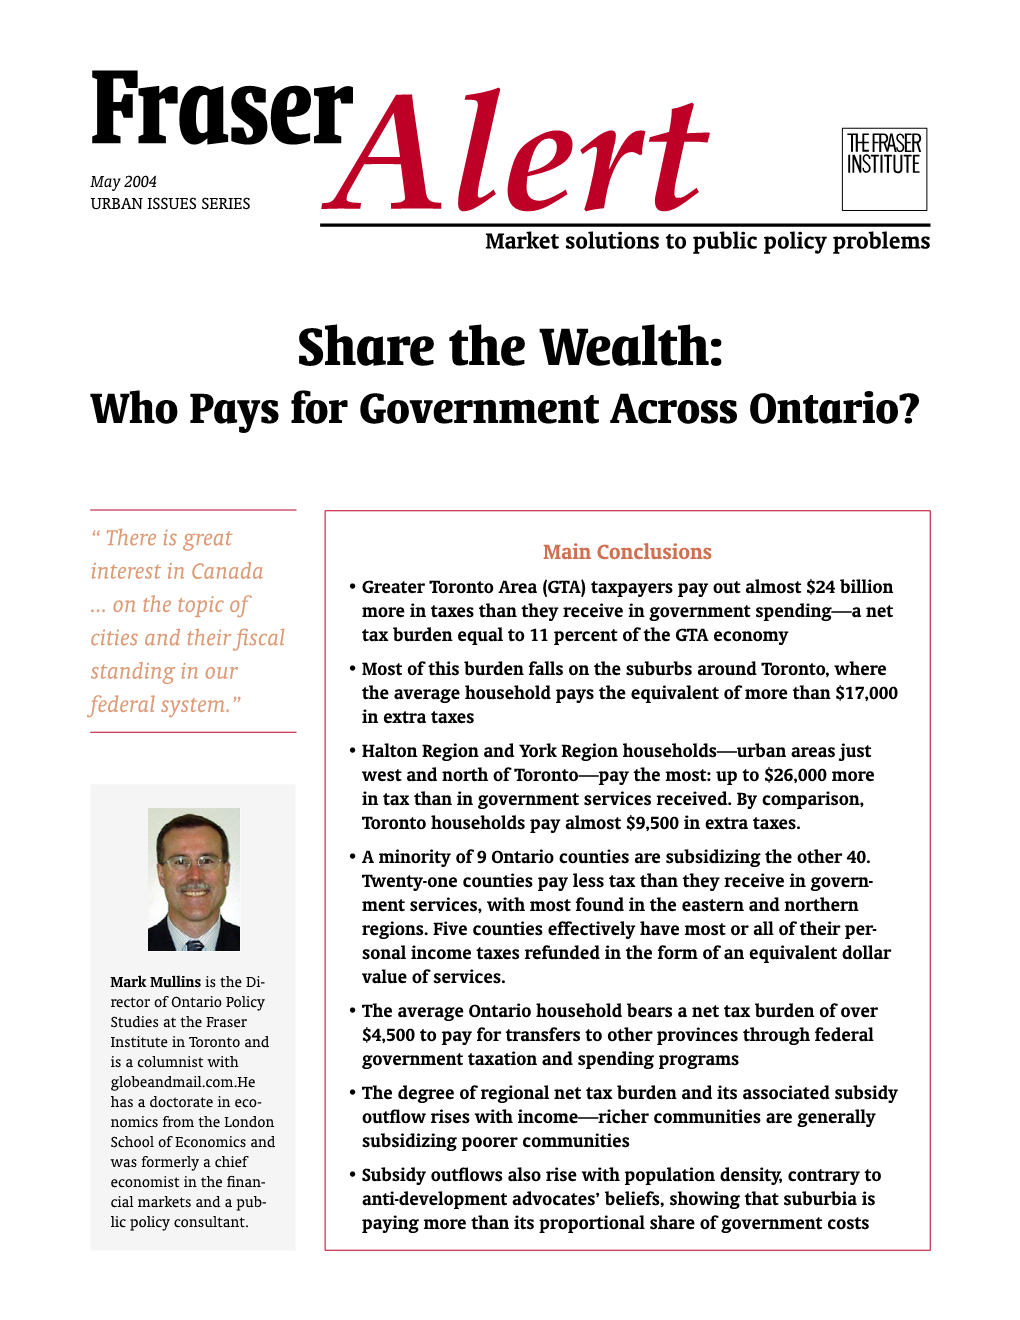 Share the Wealth: Who Pays for Government Across Ontario?